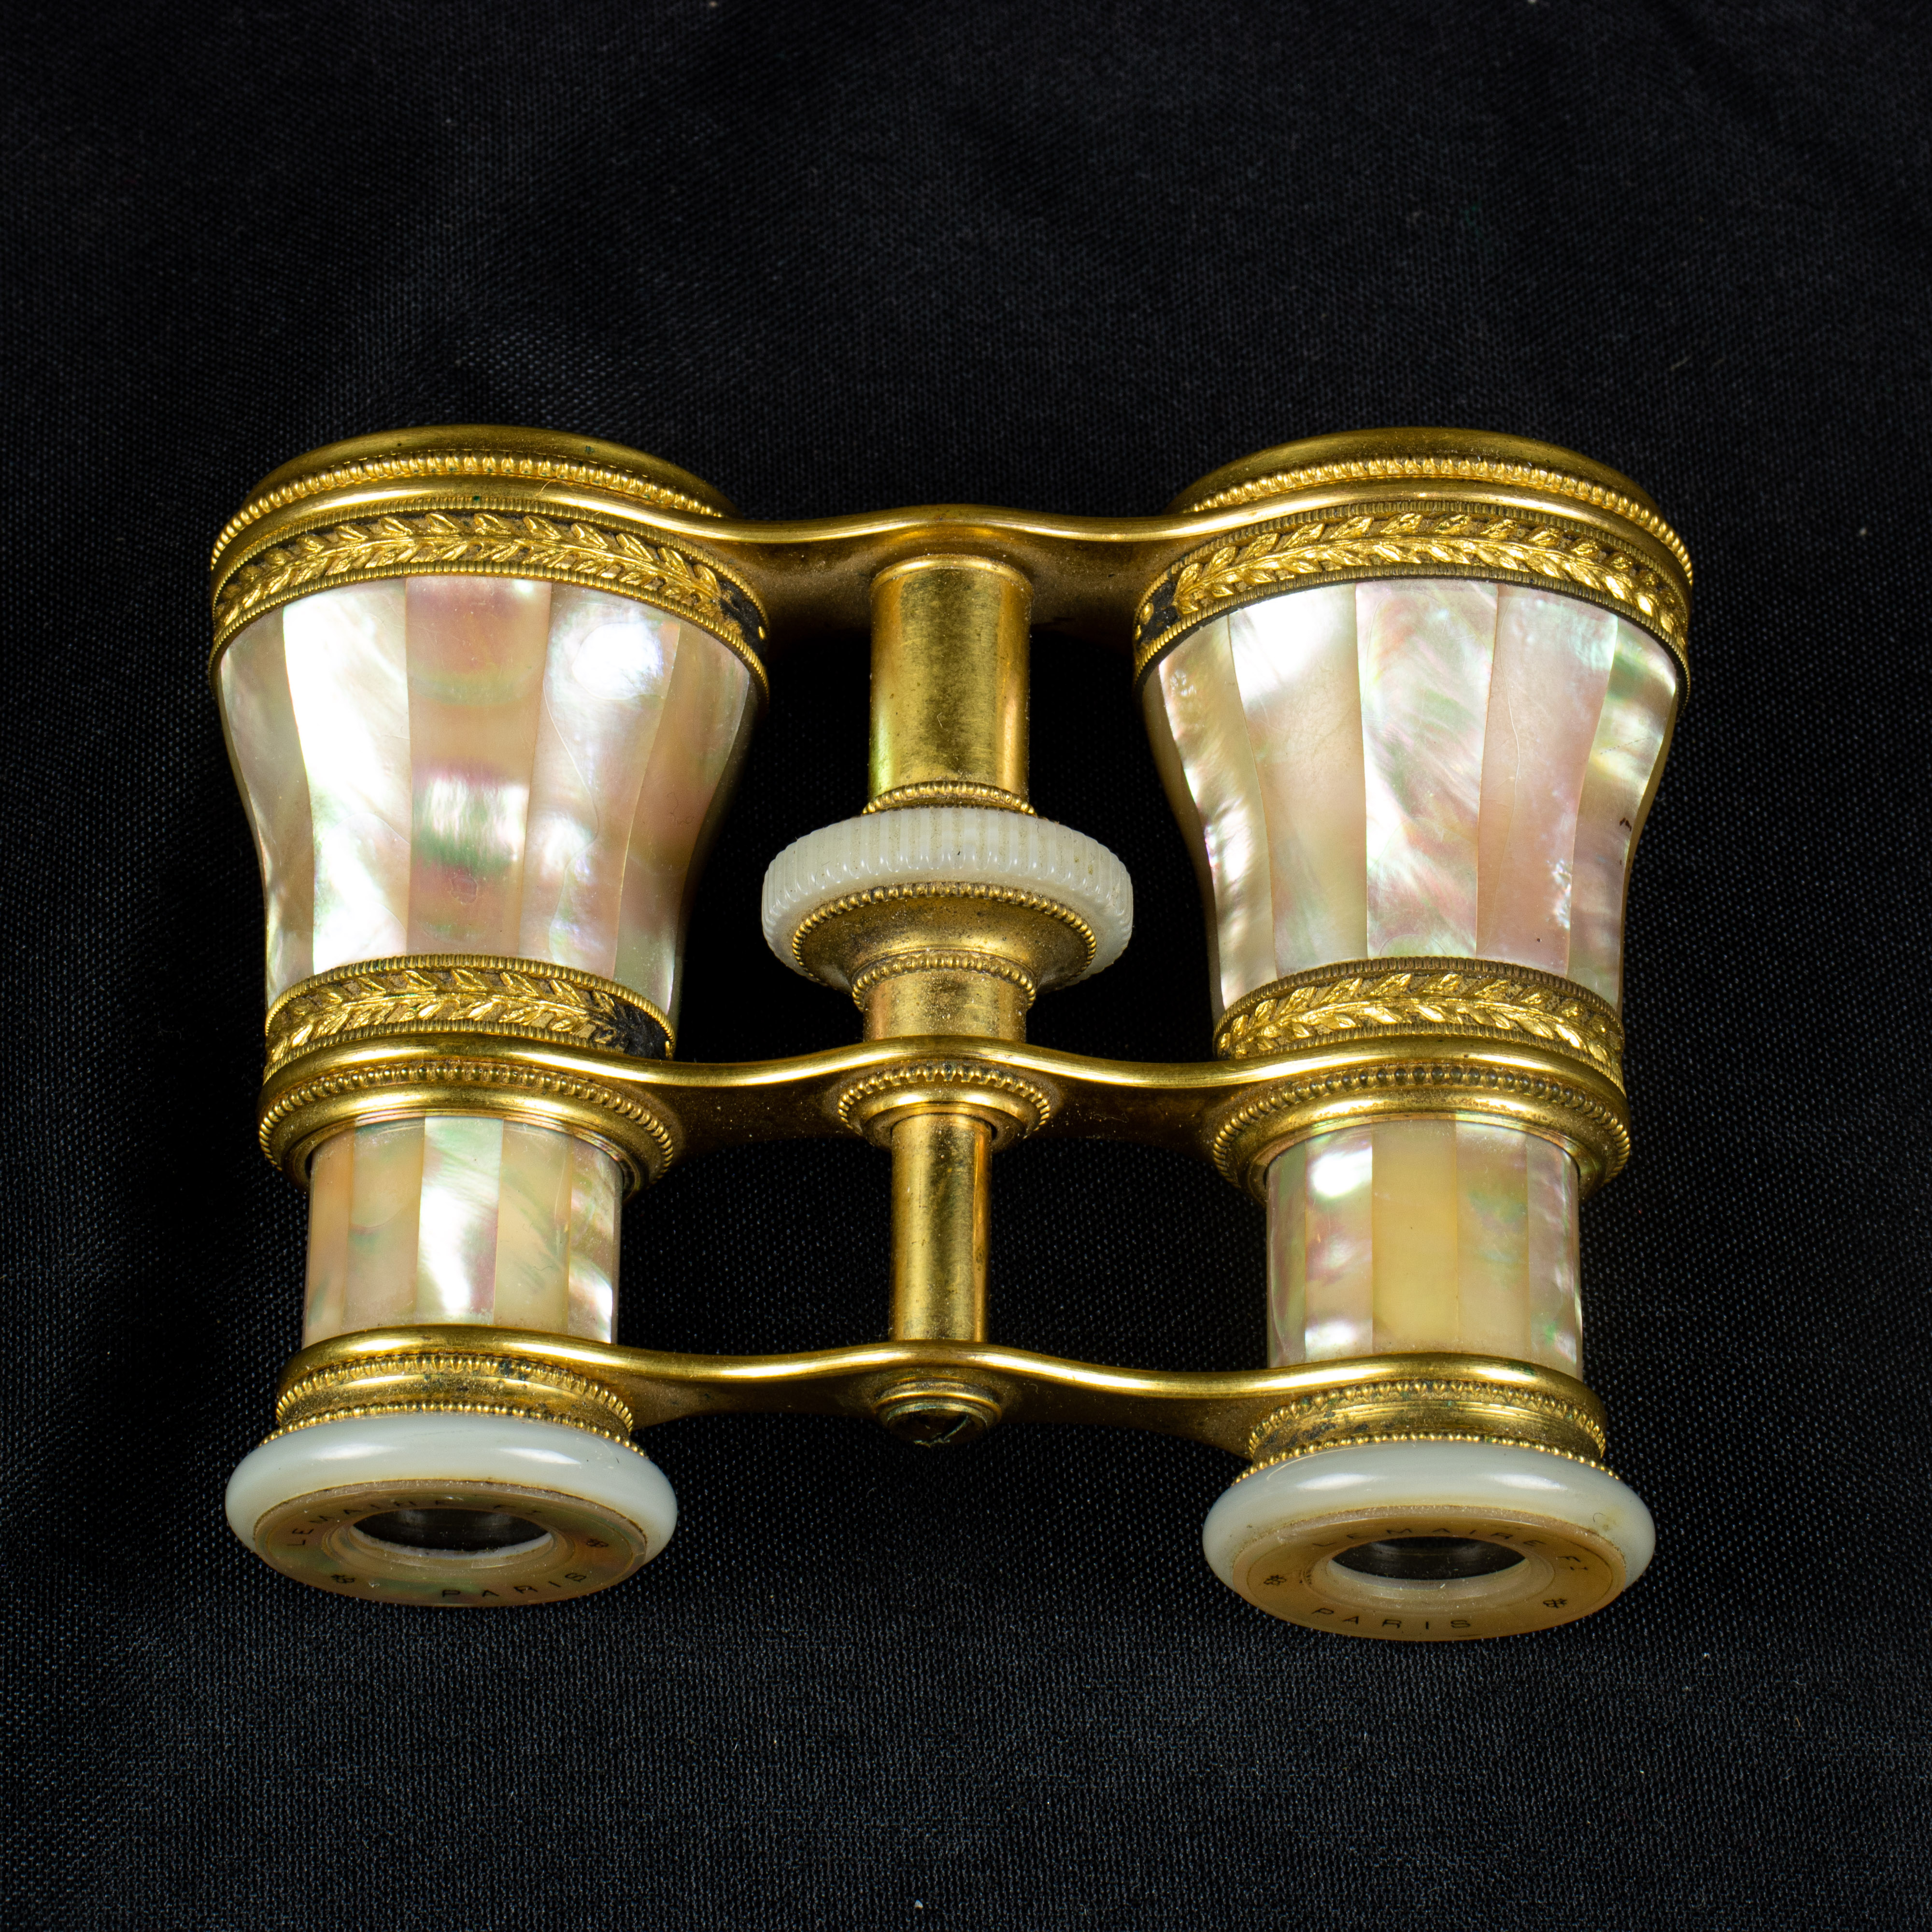 A PAIR OF LEMAIRE FILS, PARIS MOTHER-OF-PEARL